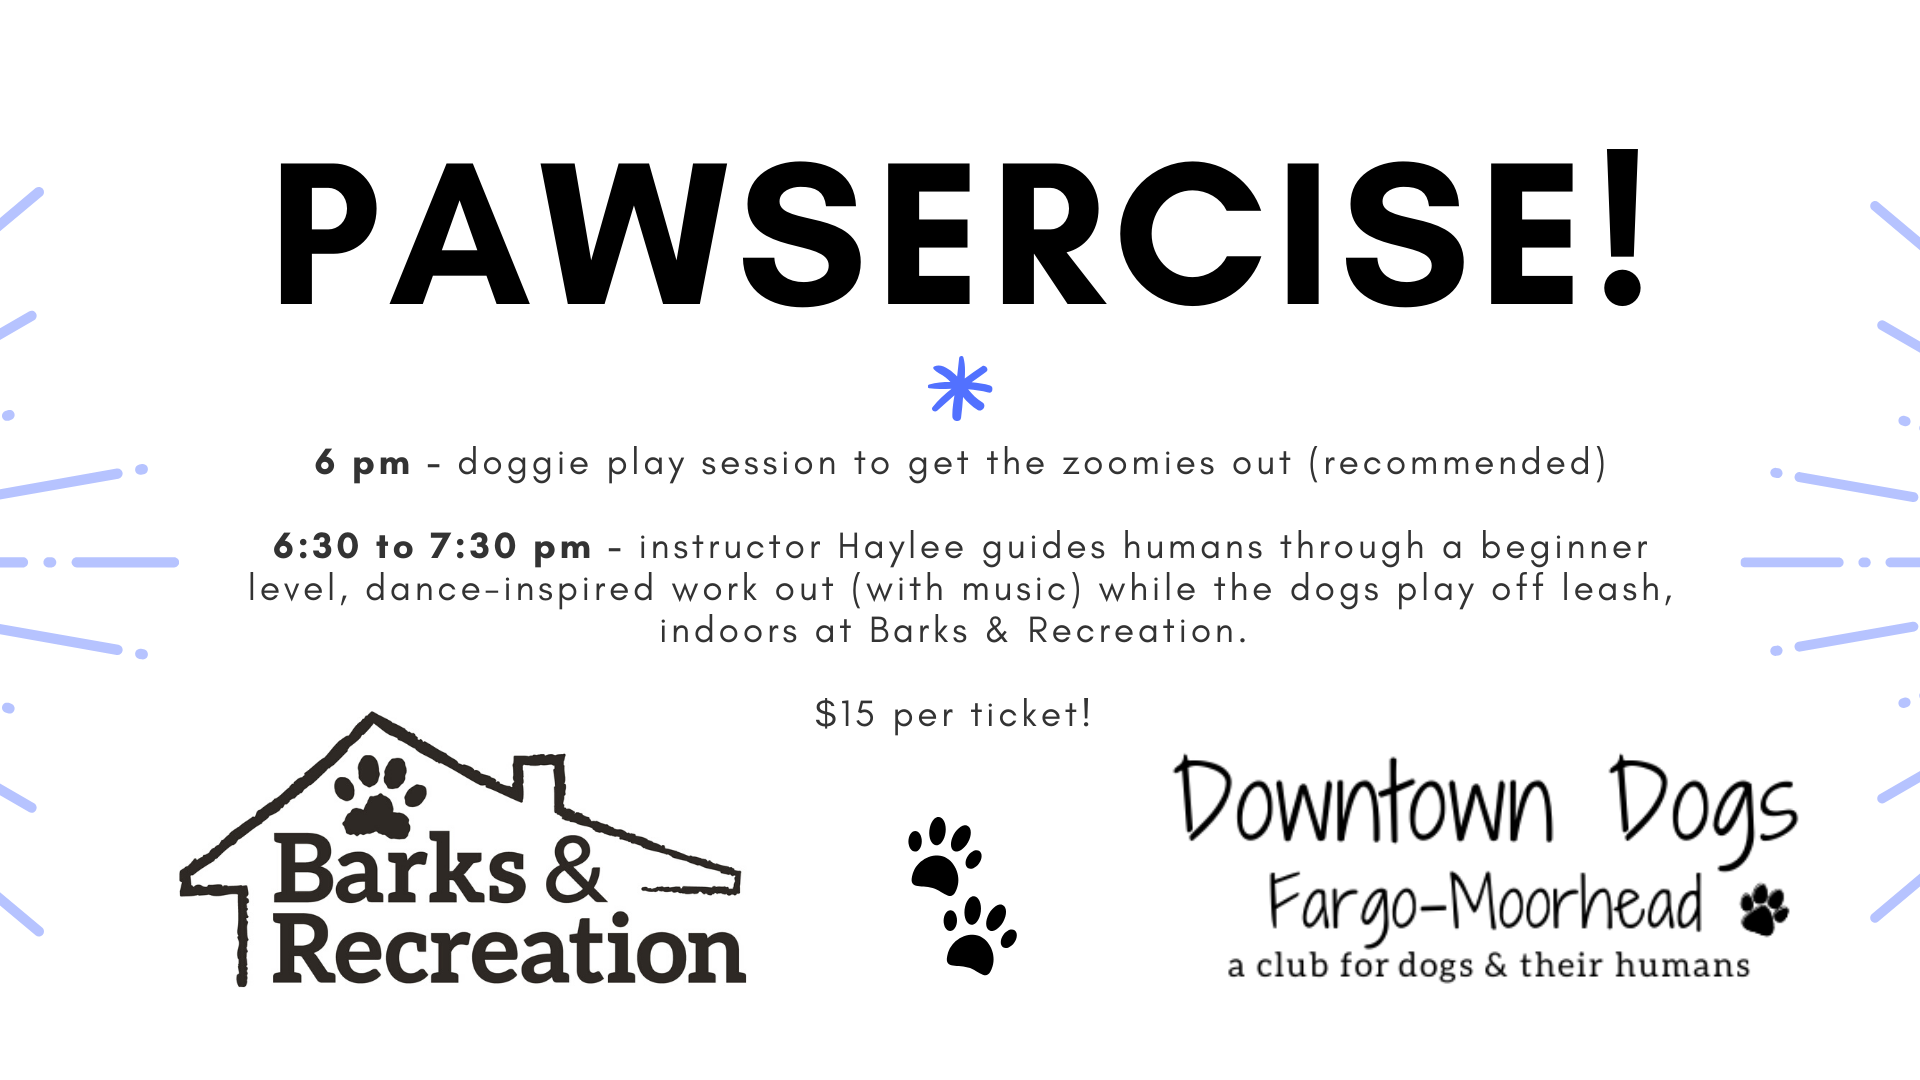 Pawsercise! (Exercise with your dog)